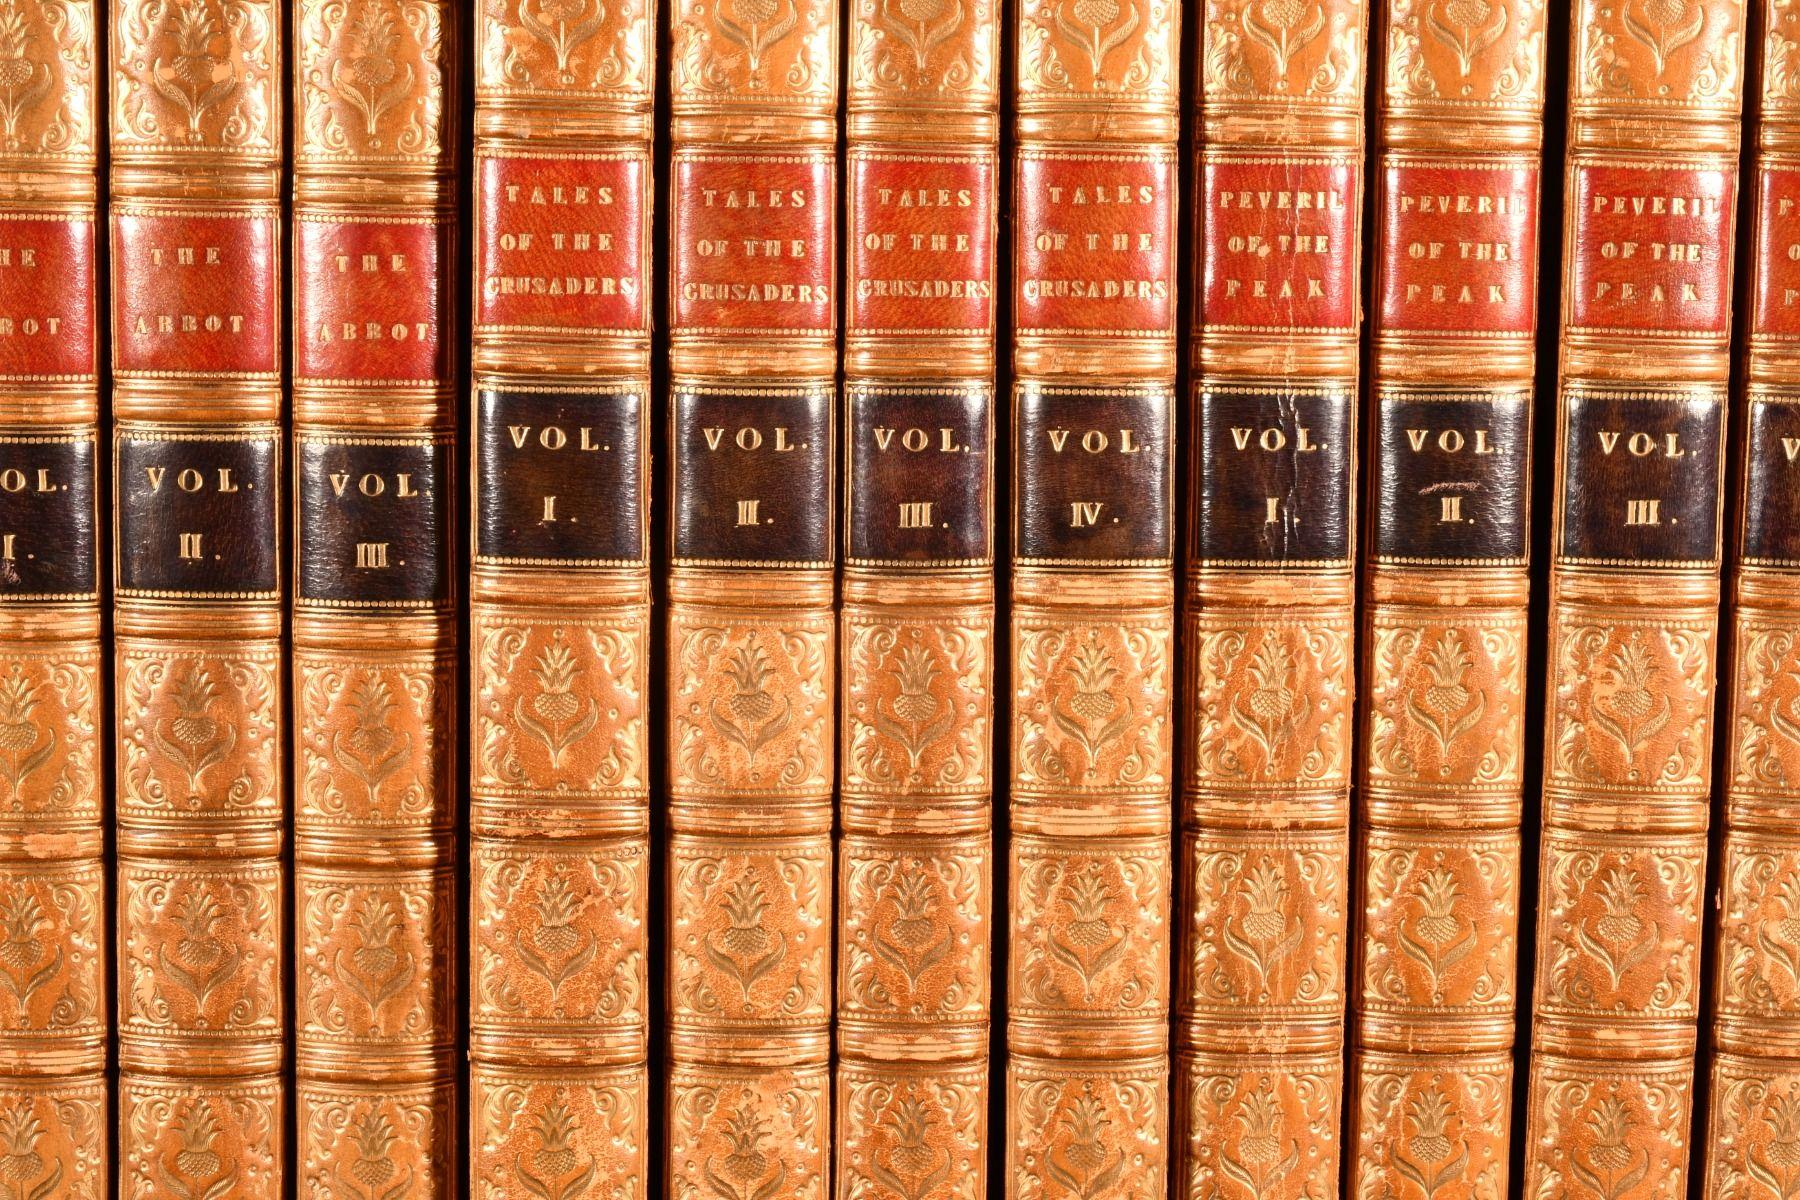 A stunning full calf fine binding of the first editions of these important works by prolific and renowned writer Sir Walter Scott. 

Sir Walter Scott (1771-1832) was a Scottish novelist and poet. Scott remains a celebrated figure in Scottish